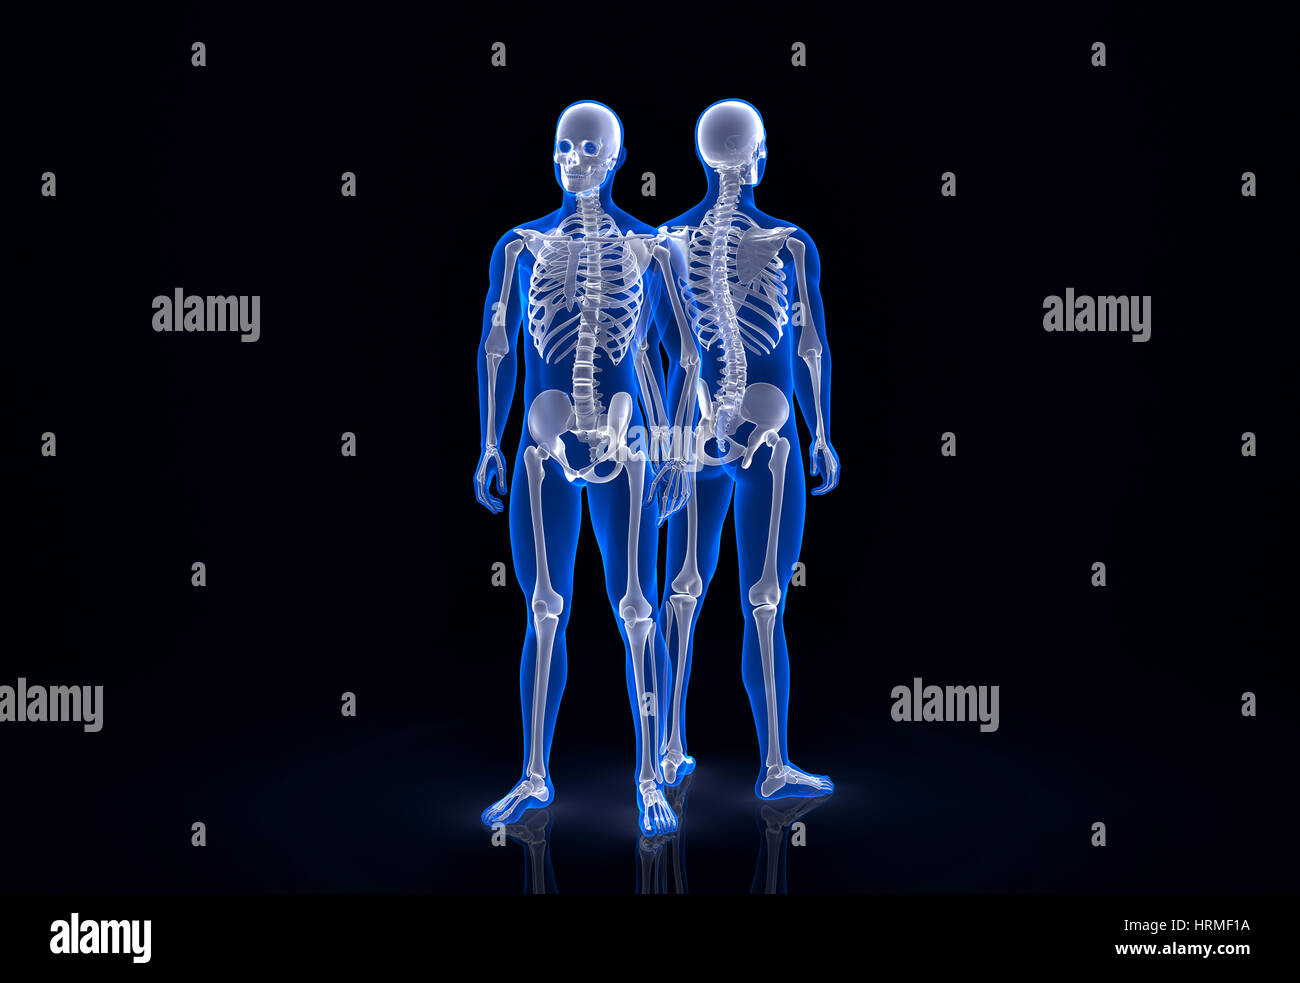 Human Skeleton Front And Back View Contains Clipping Path Stock Photo